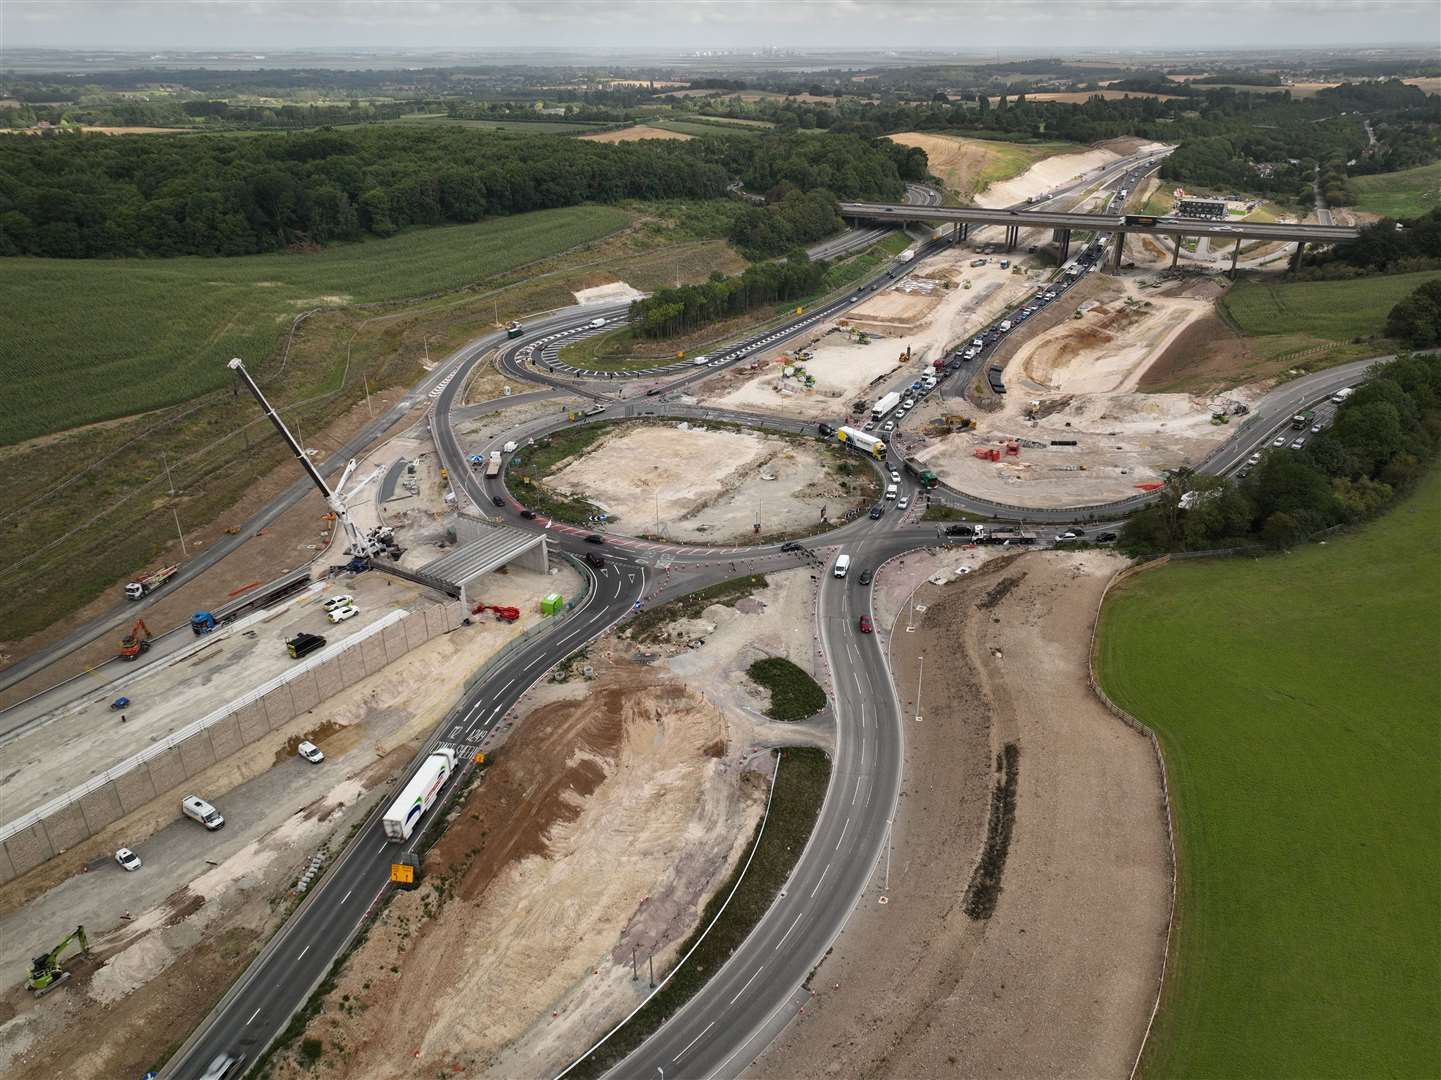 The coastbound carriageway of the M2 between Junctions 4 (Gillingham) and 5 will be closed all weekend